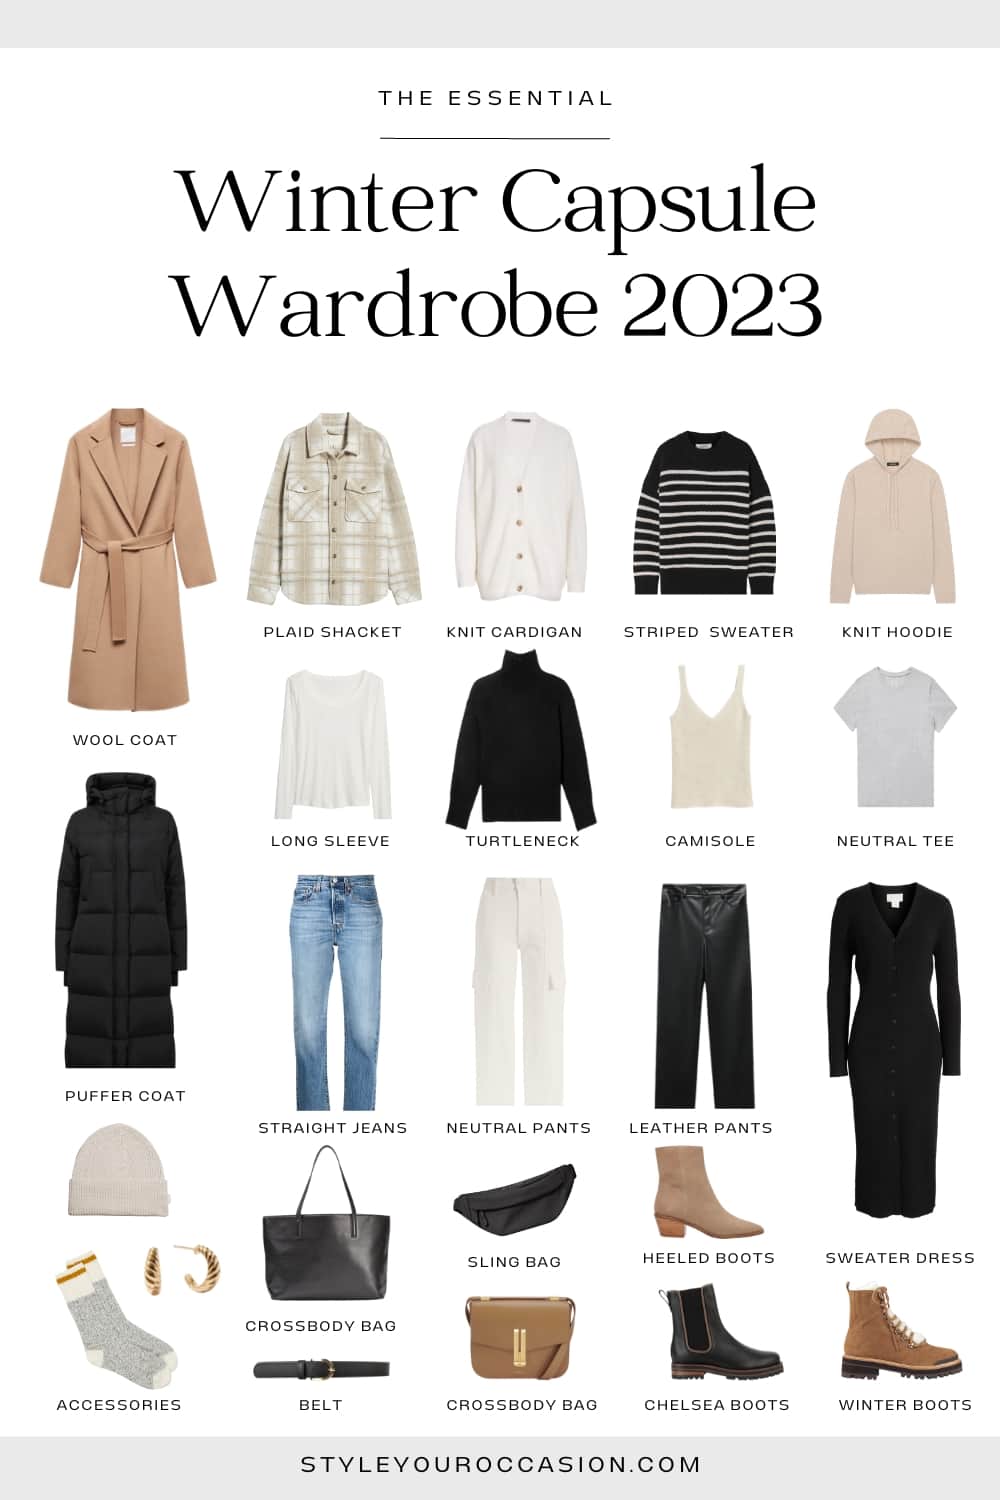 image of a 2023 Winter Capsule Wardrobe with neutral clothing and accessories